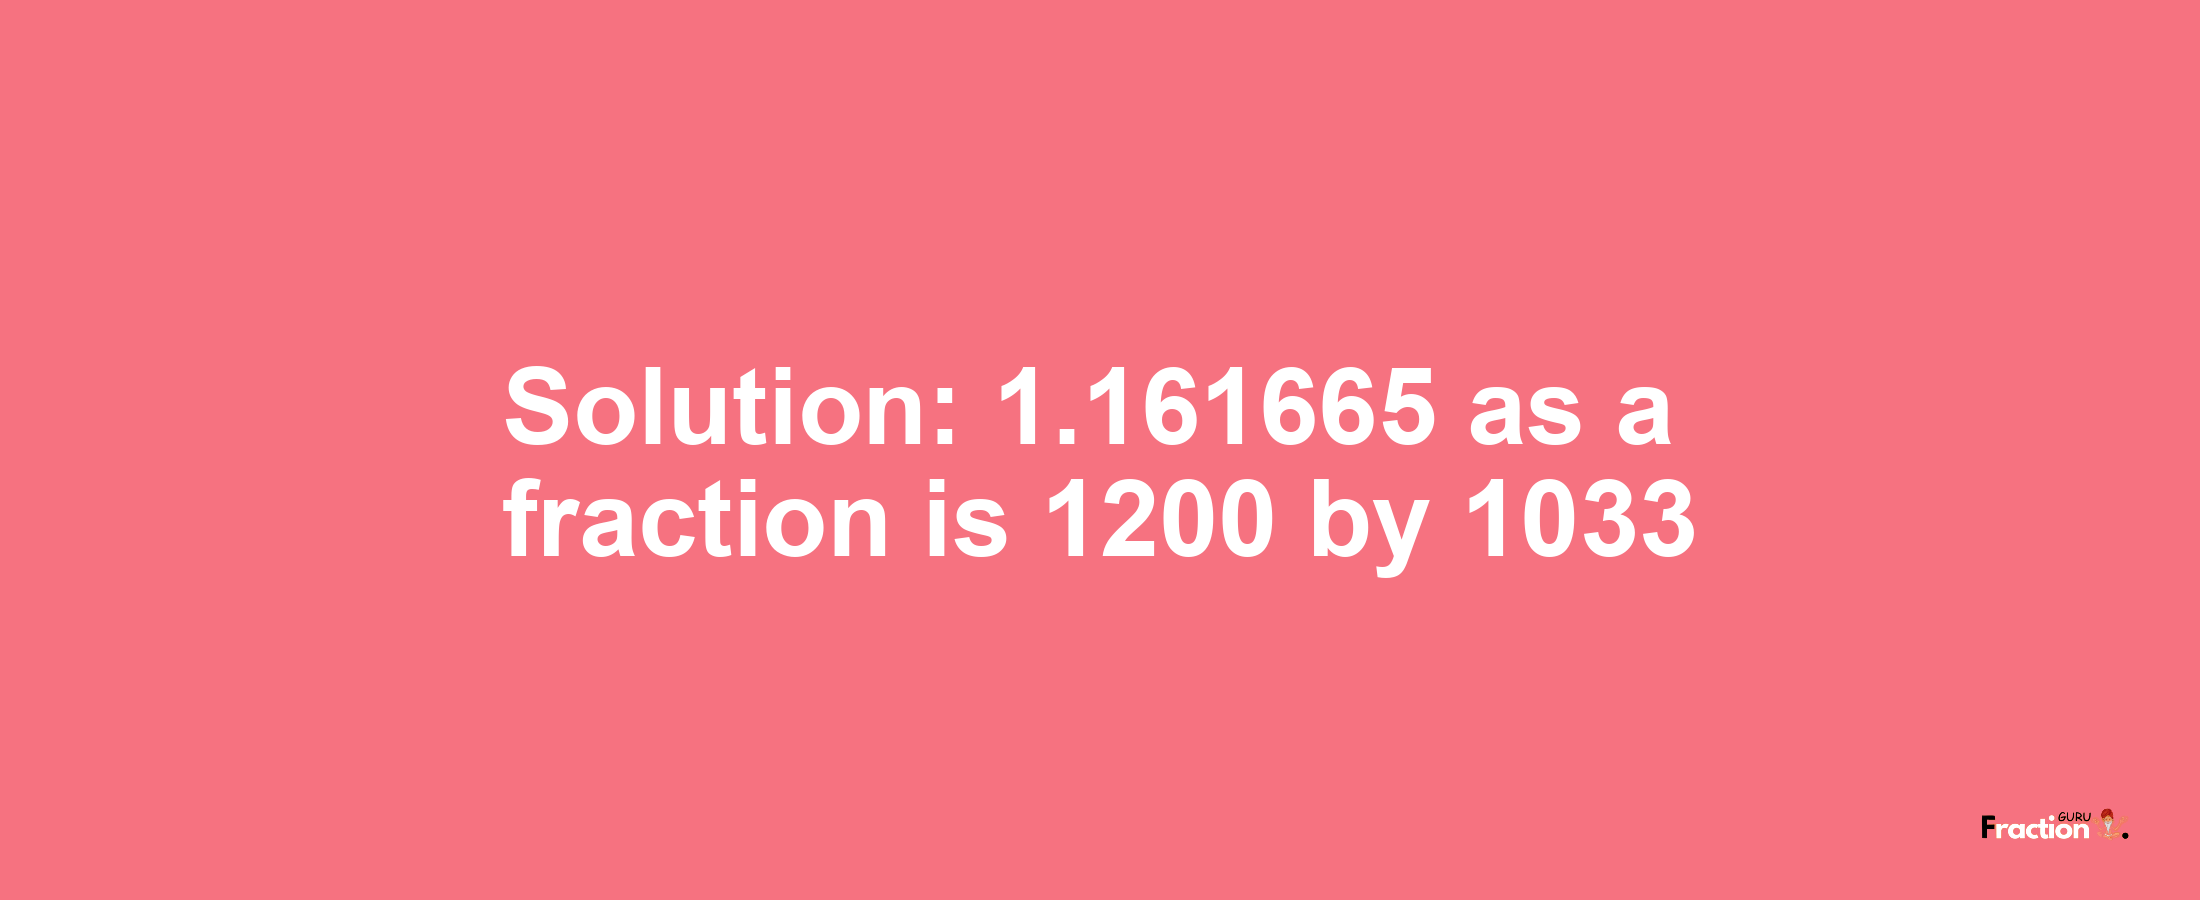 Solution:1.161665 as a fraction is 1200/1033